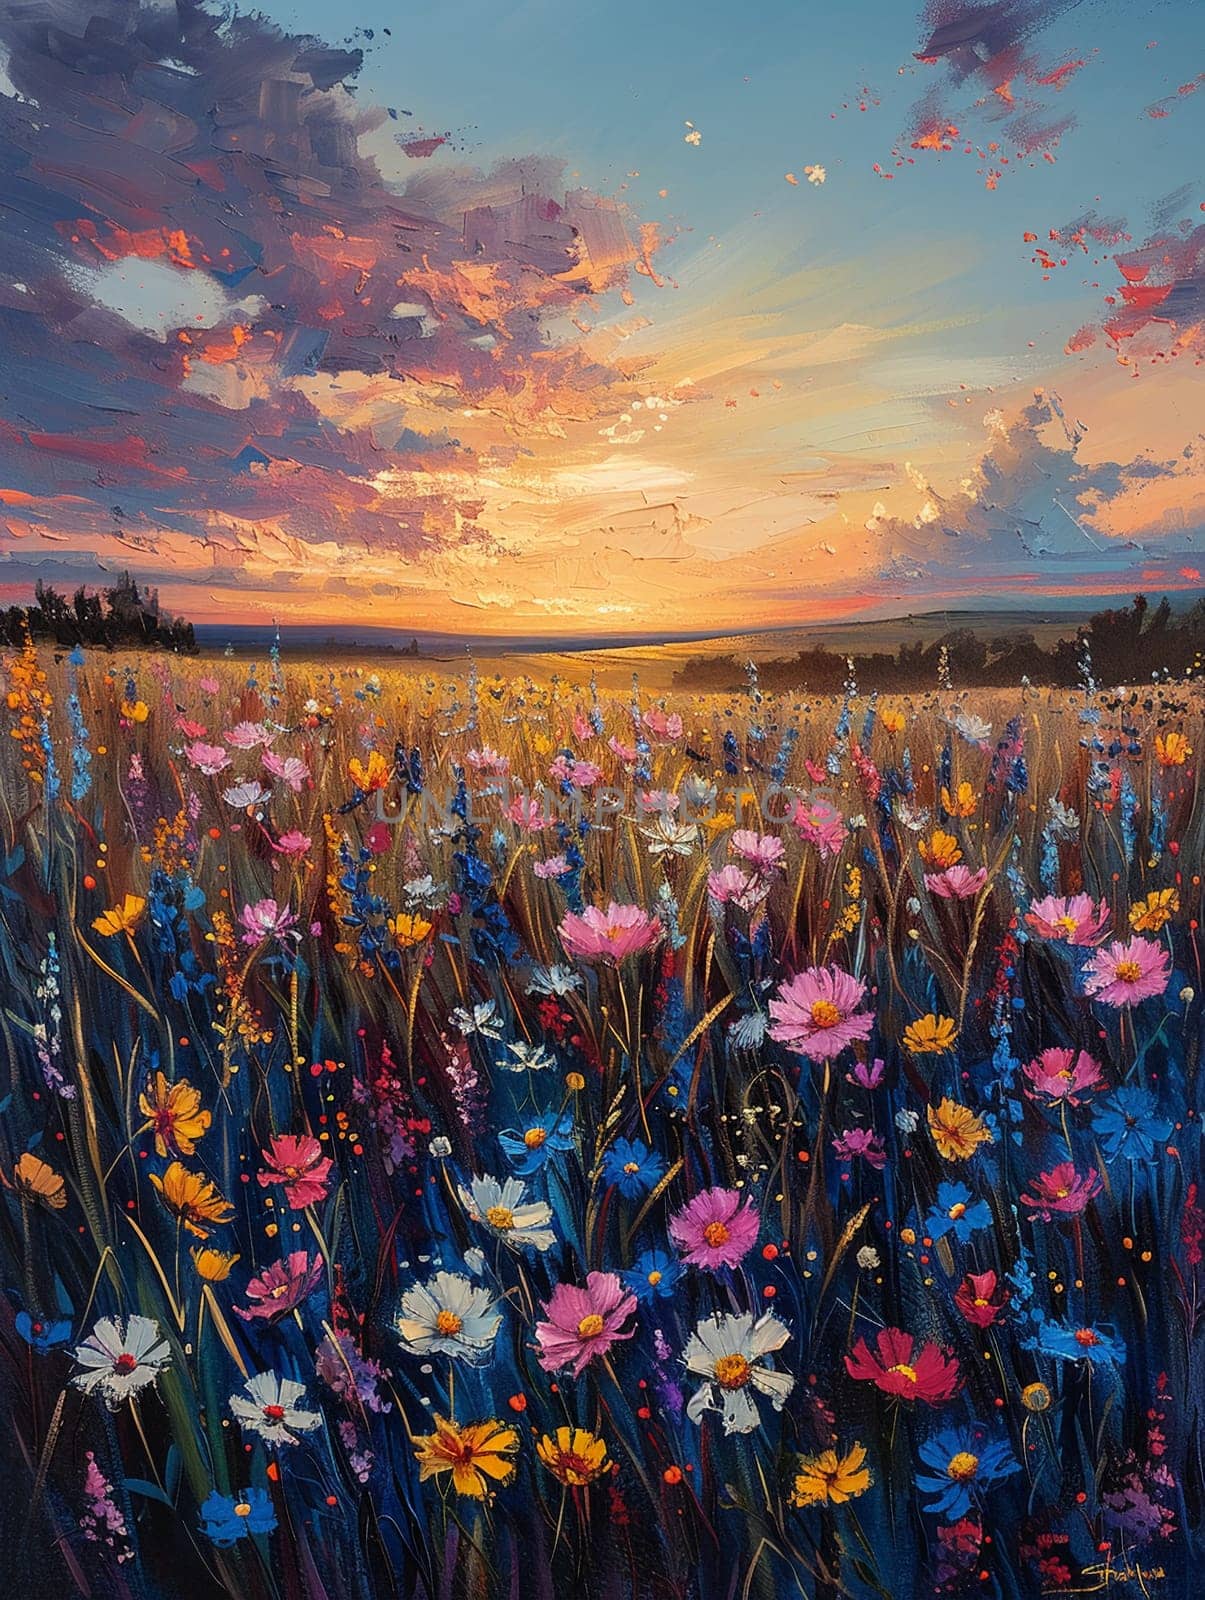 Wildflower meadow at dawn painted with a fresh, vibrant palette, capturing the essence of spring.